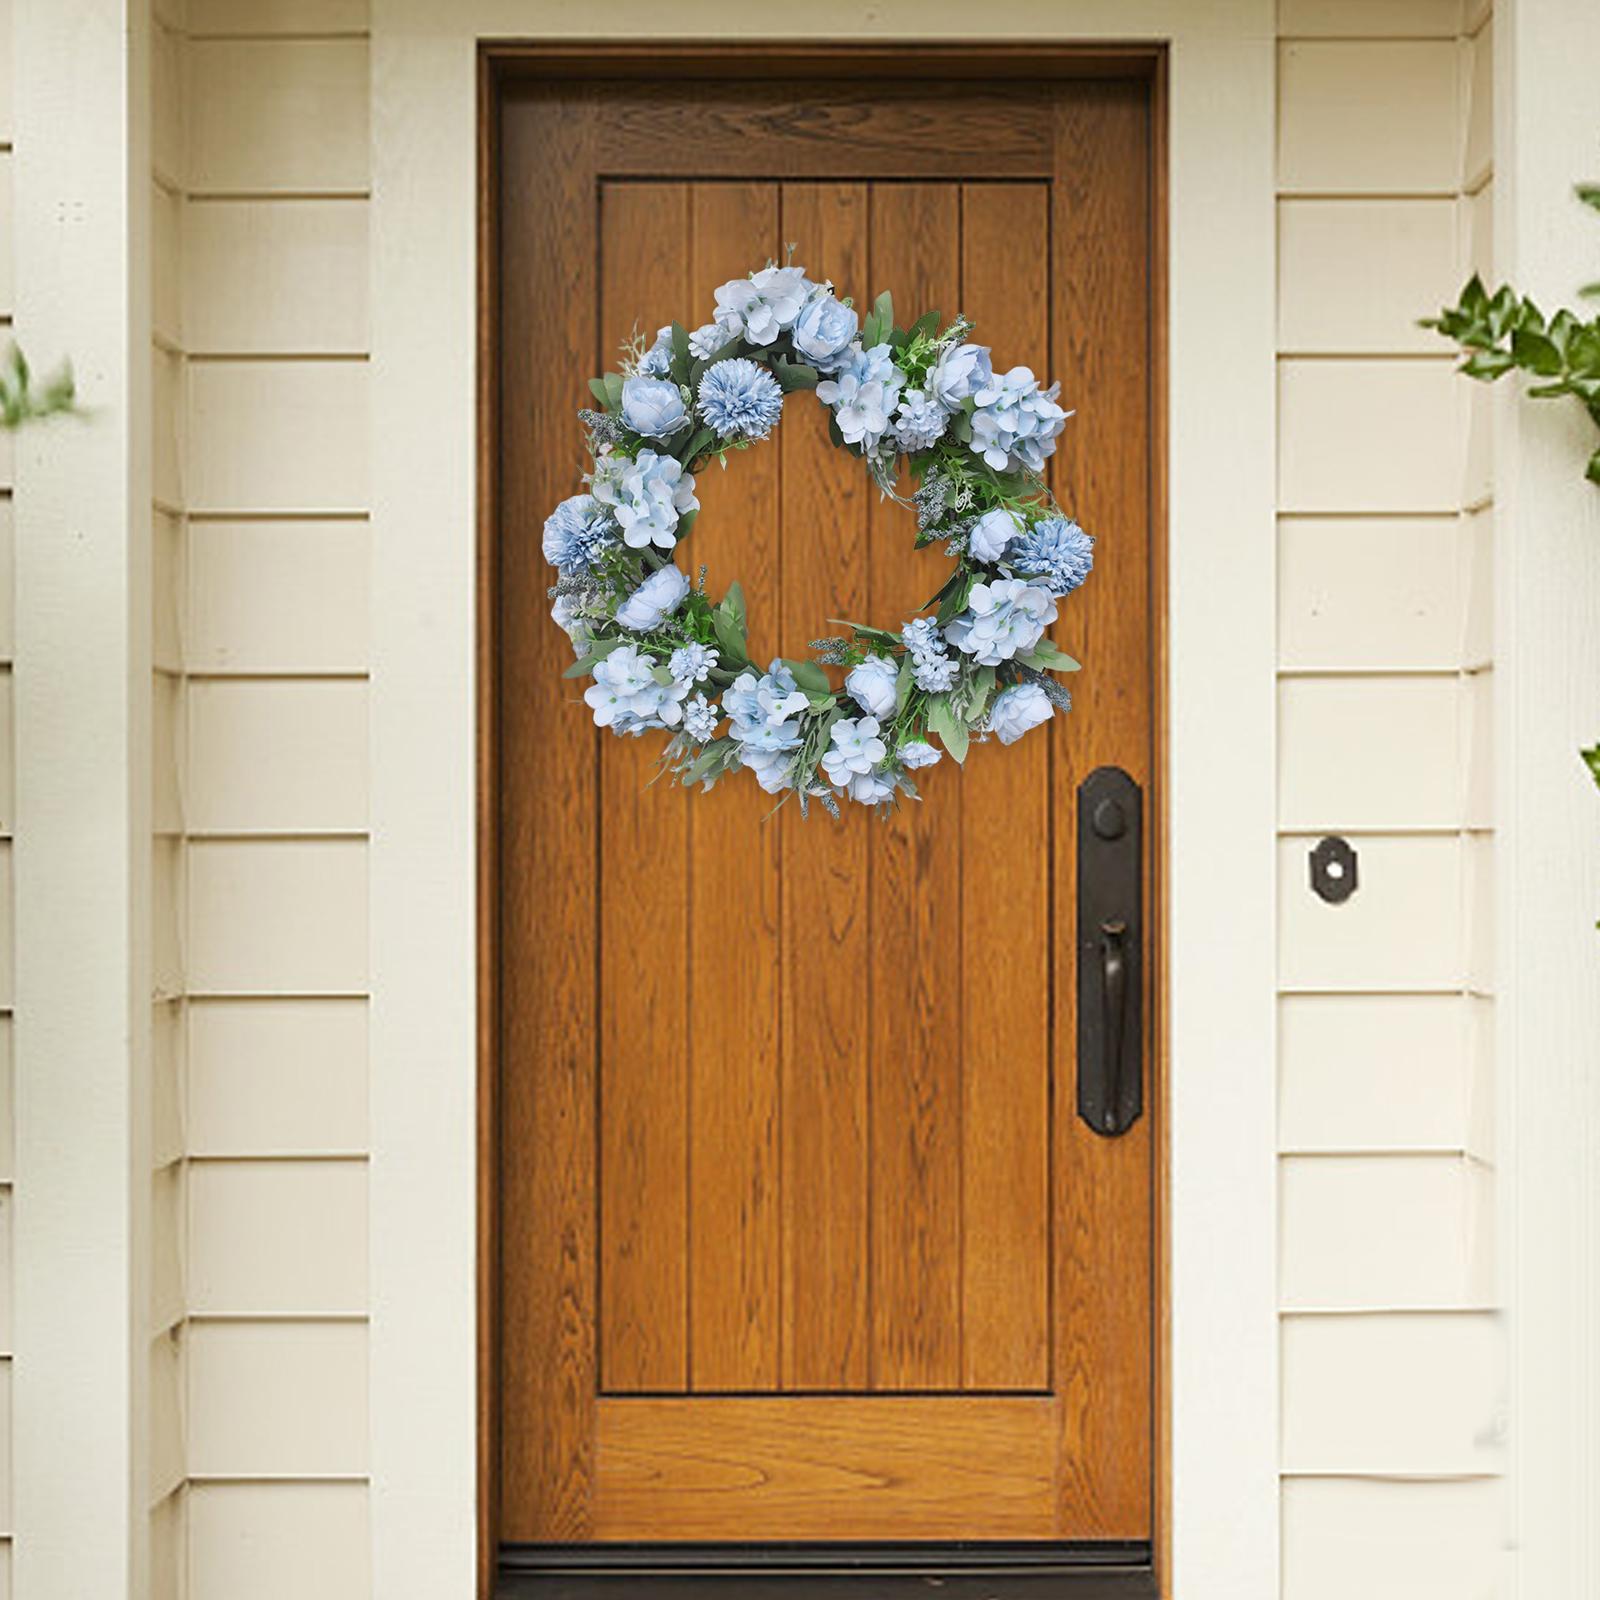 Artificial Wreath Garland Floral Front Door Wreath for Wedding Outside Porch blue